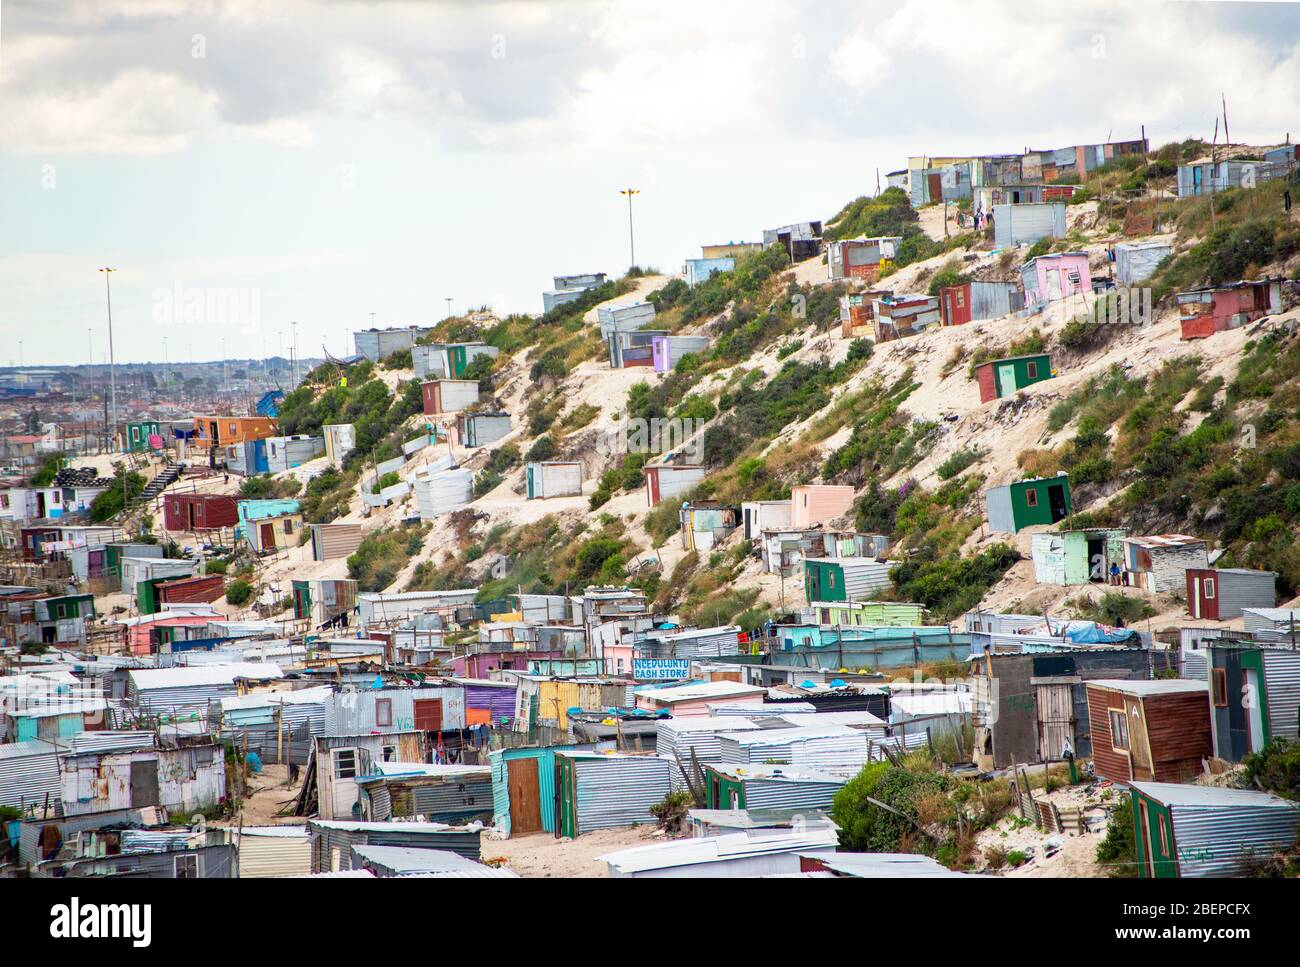 A view of the township called Khayelitsha on the outskirts of Cape Town,  South Africa. The shacks sit on sandy soil and hillsides. It is one of the  biggest townships in Africa